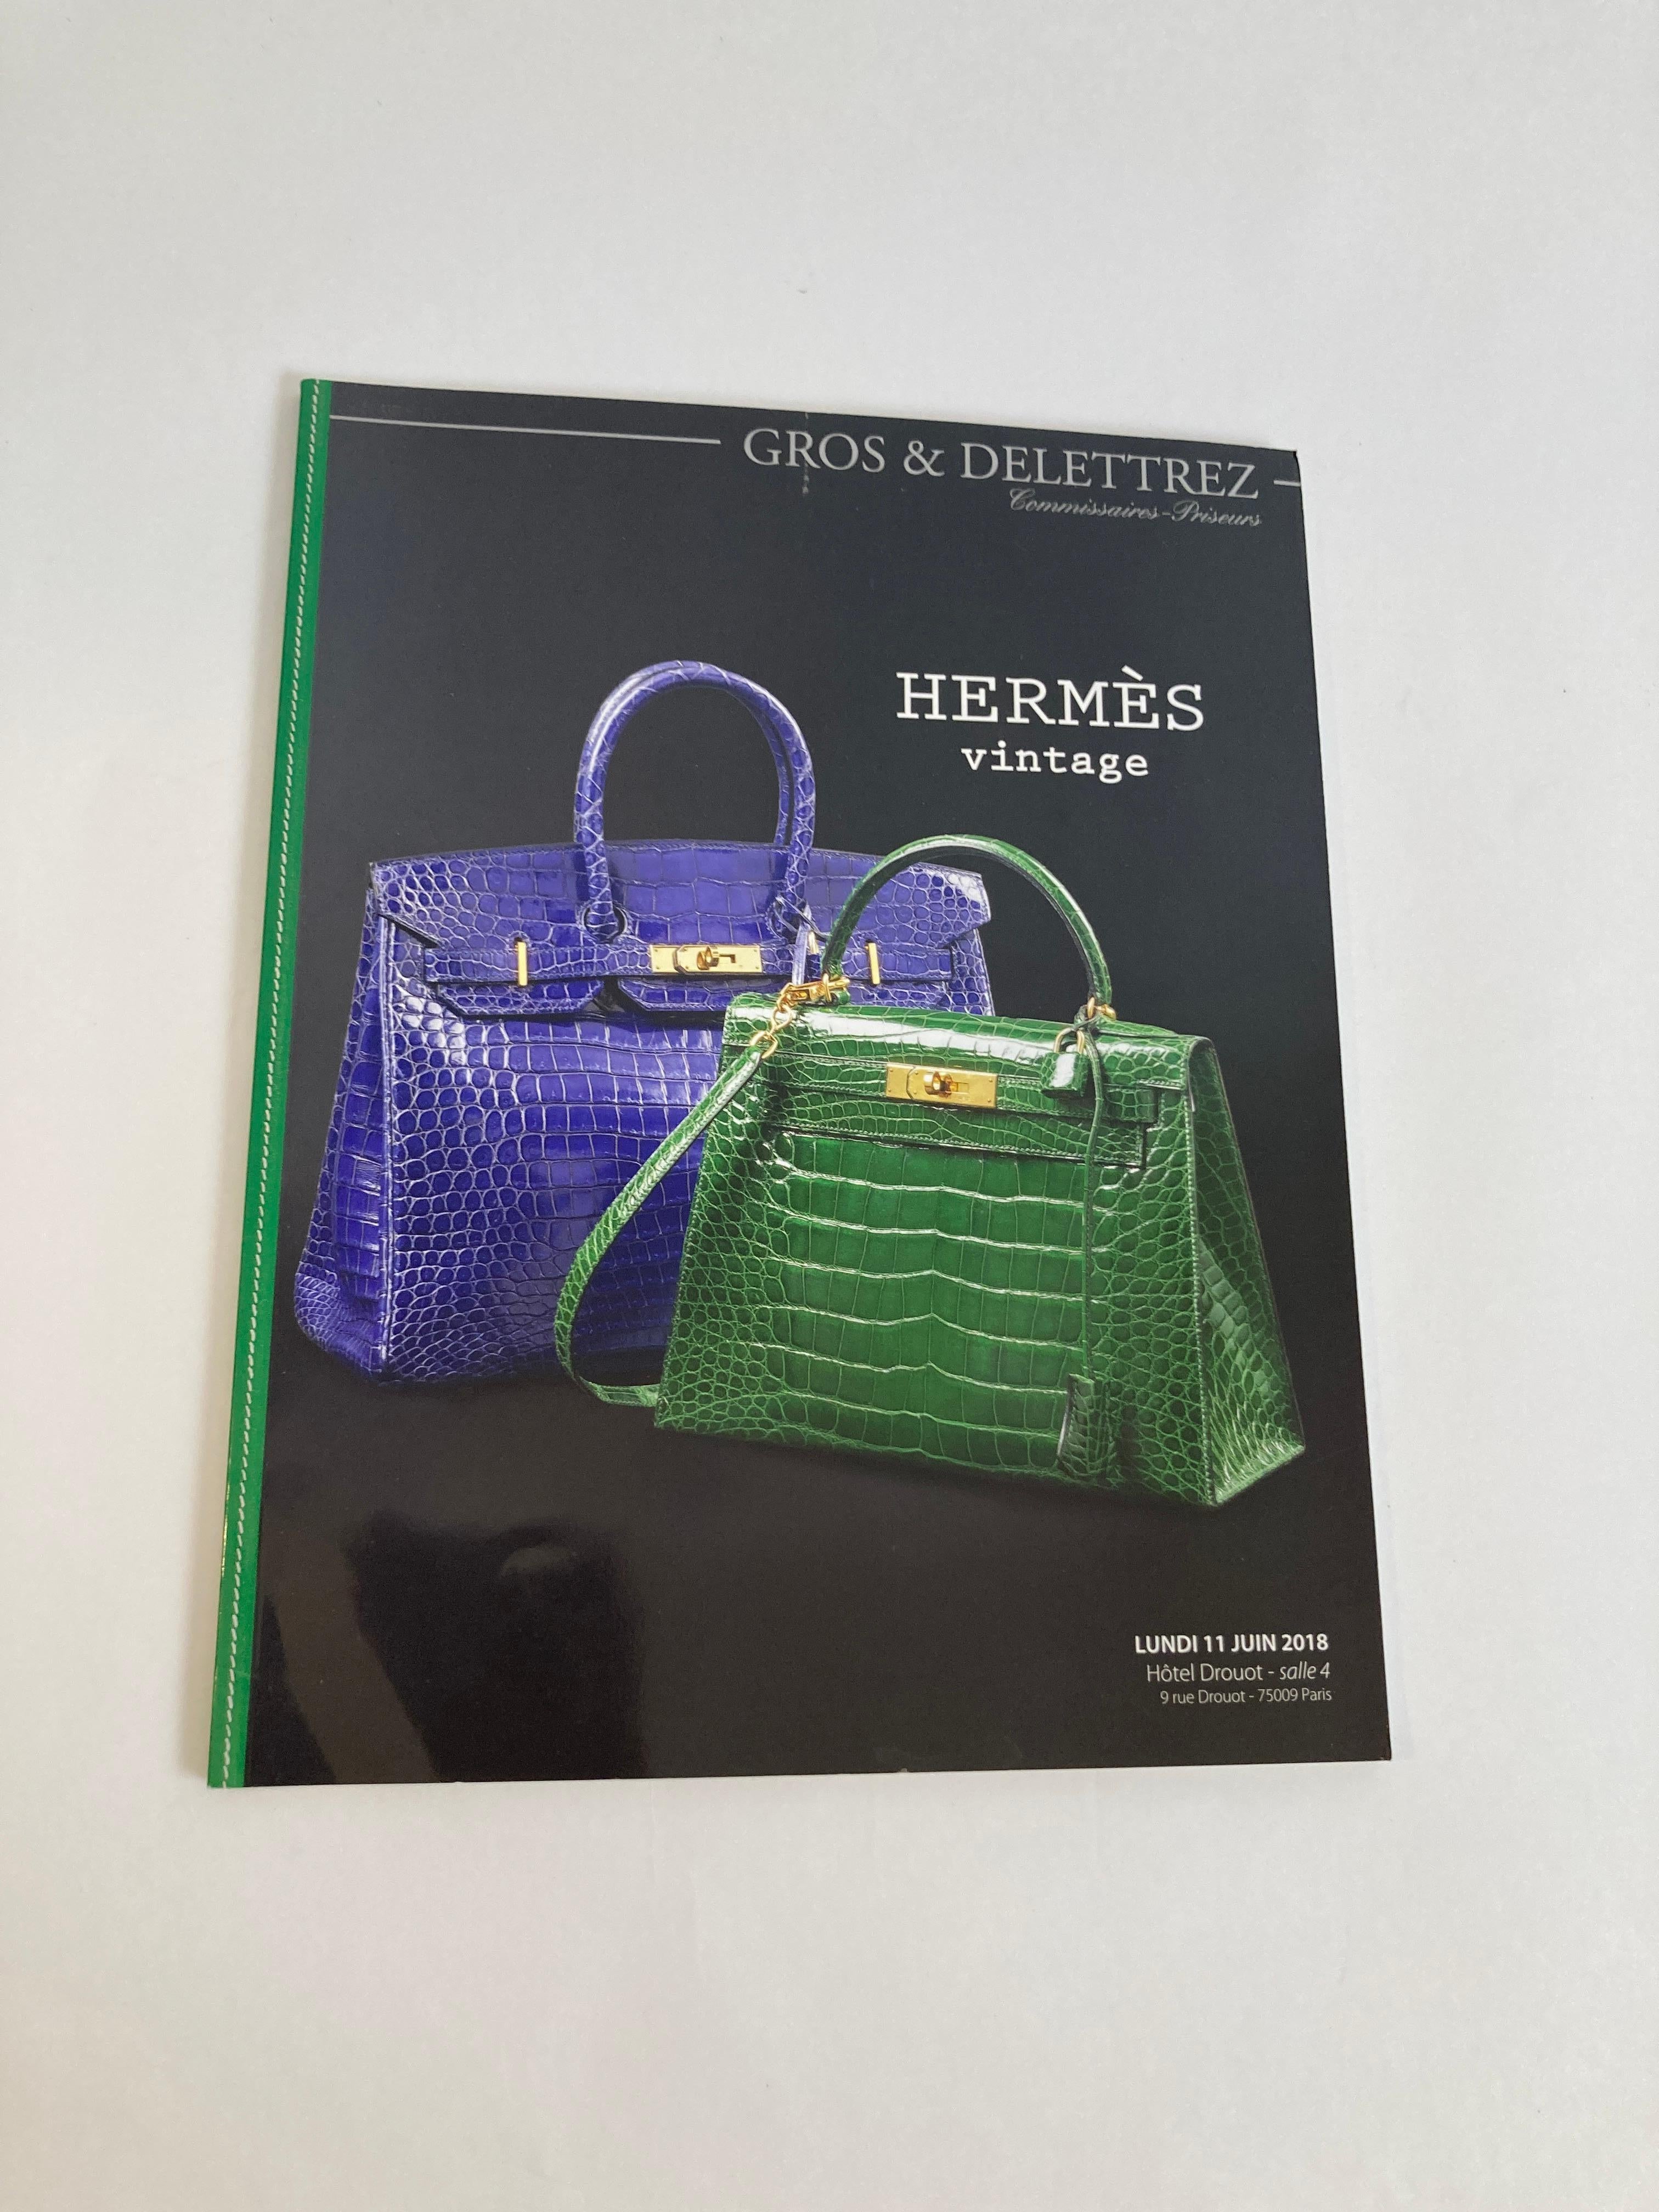 Hermes Vintage Paris Auction Catalog 2018 Published by Gros & Delettrez In Good Condition For Sale In North Hollywood, CA